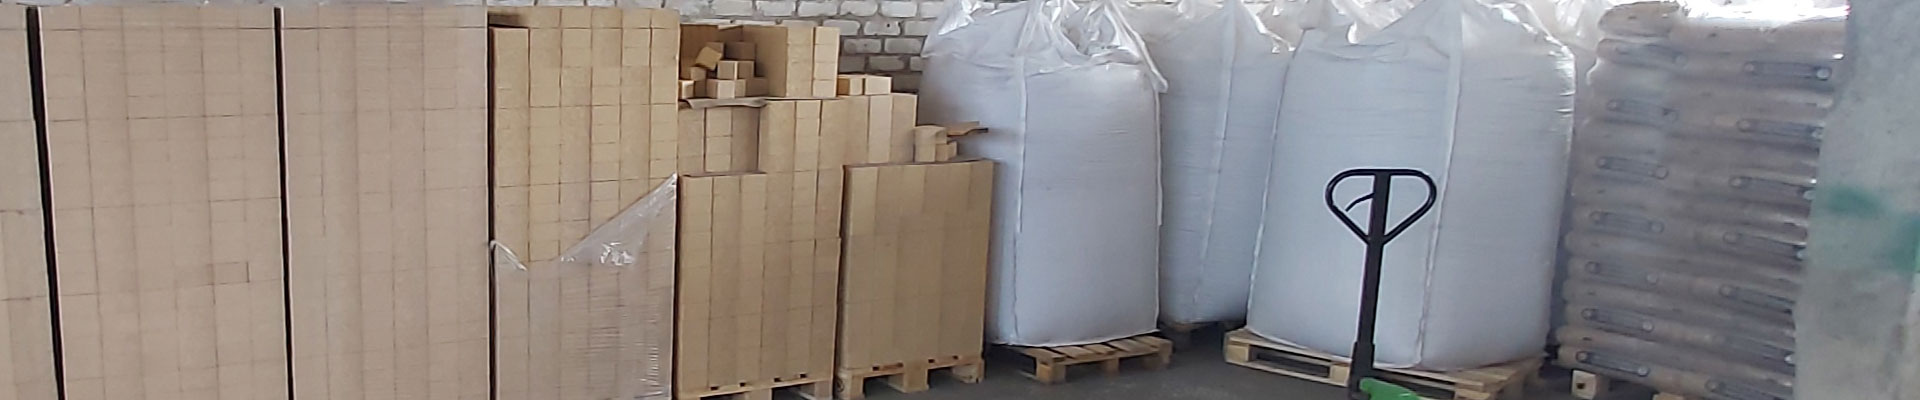 Pressed blocks in warehouse ready for loading